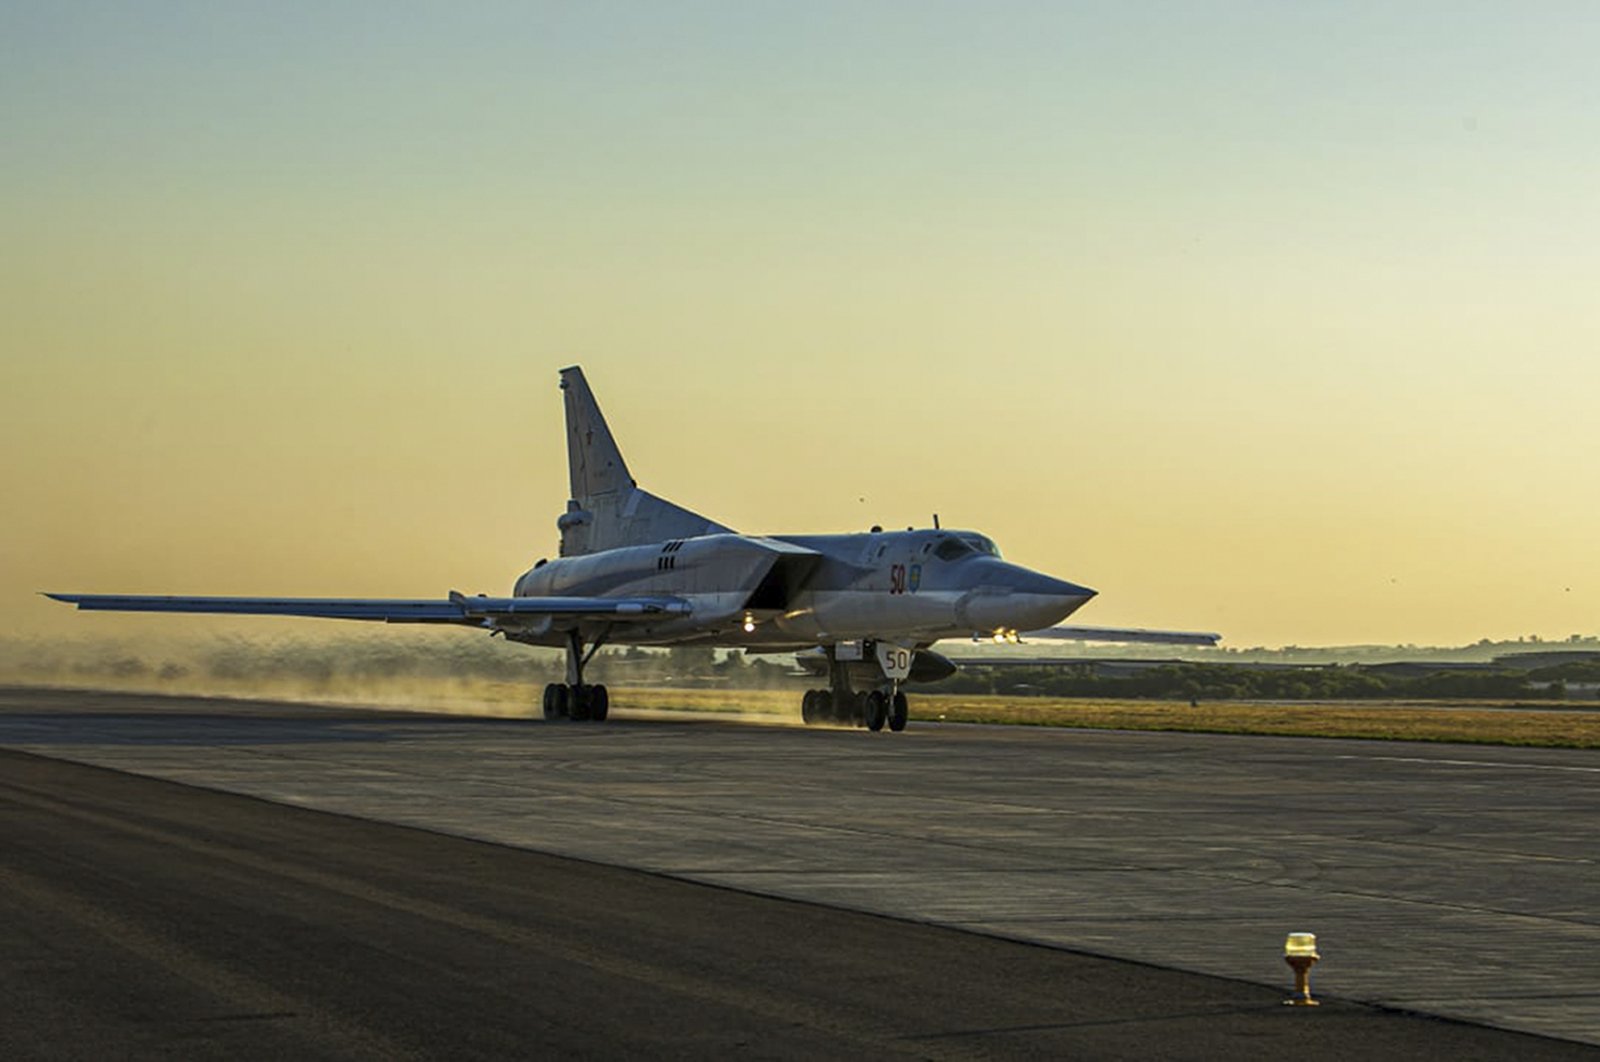 In this photo released by Russian Defense Ministry Press Service on Friday, June 25, 2021, a Tu-22M3 bomber of the Russian air force takes off from the Hemeimeem air base in Syria. (Russian Defense Ministry Press Service via AP, File Photo)